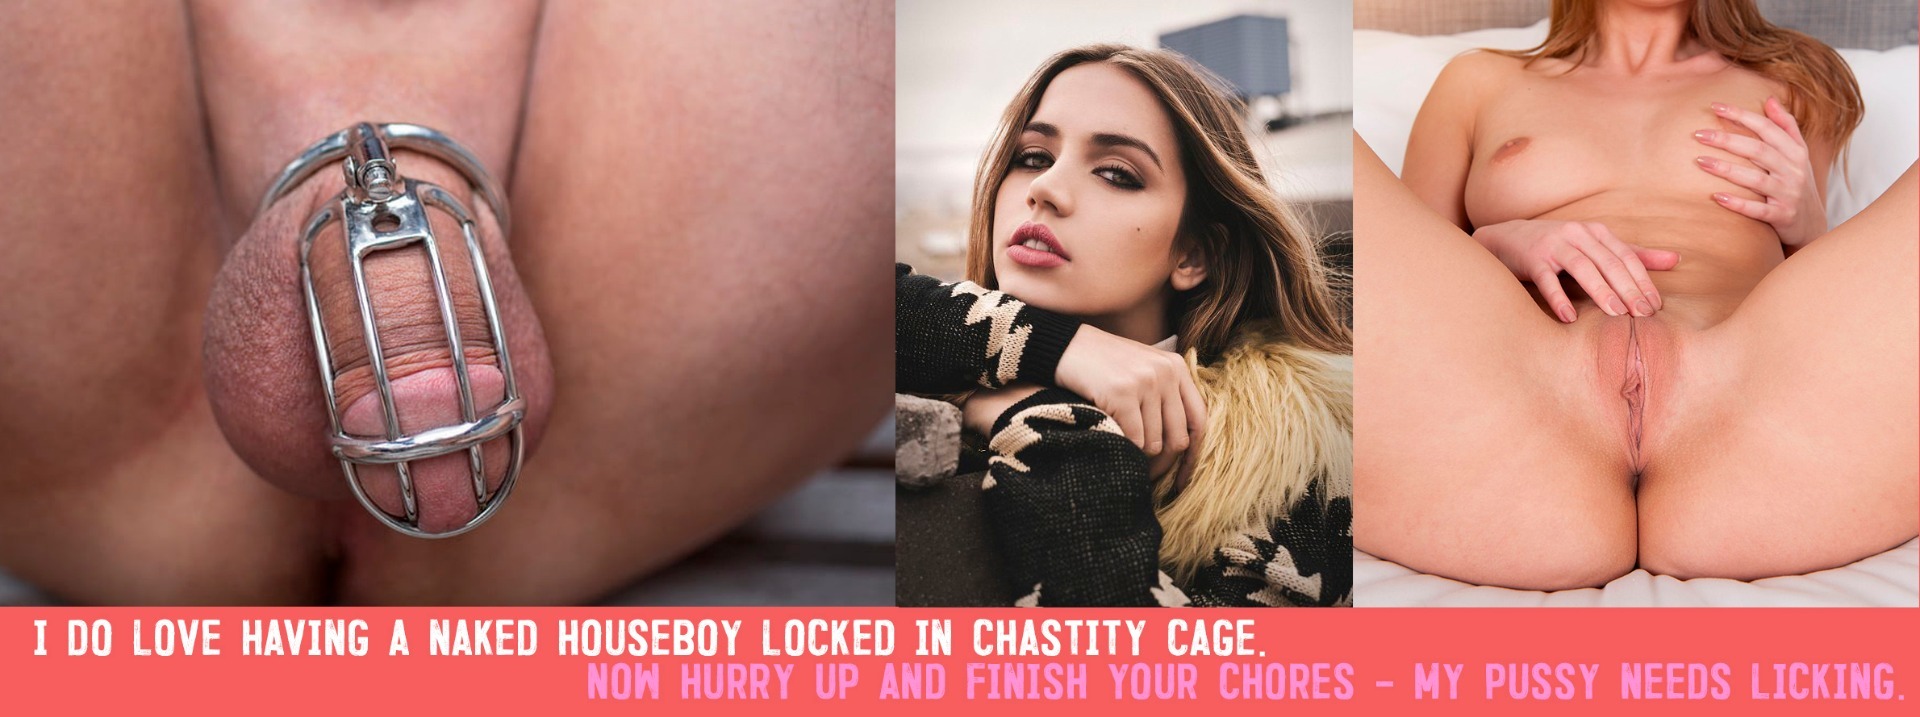 asian mother big tits asian big tits mother asian big tits mother asian big #anadearmas #fake #mistress #caption #chastity #sexslave #femdom #keyholder #pussylicking #goodboy